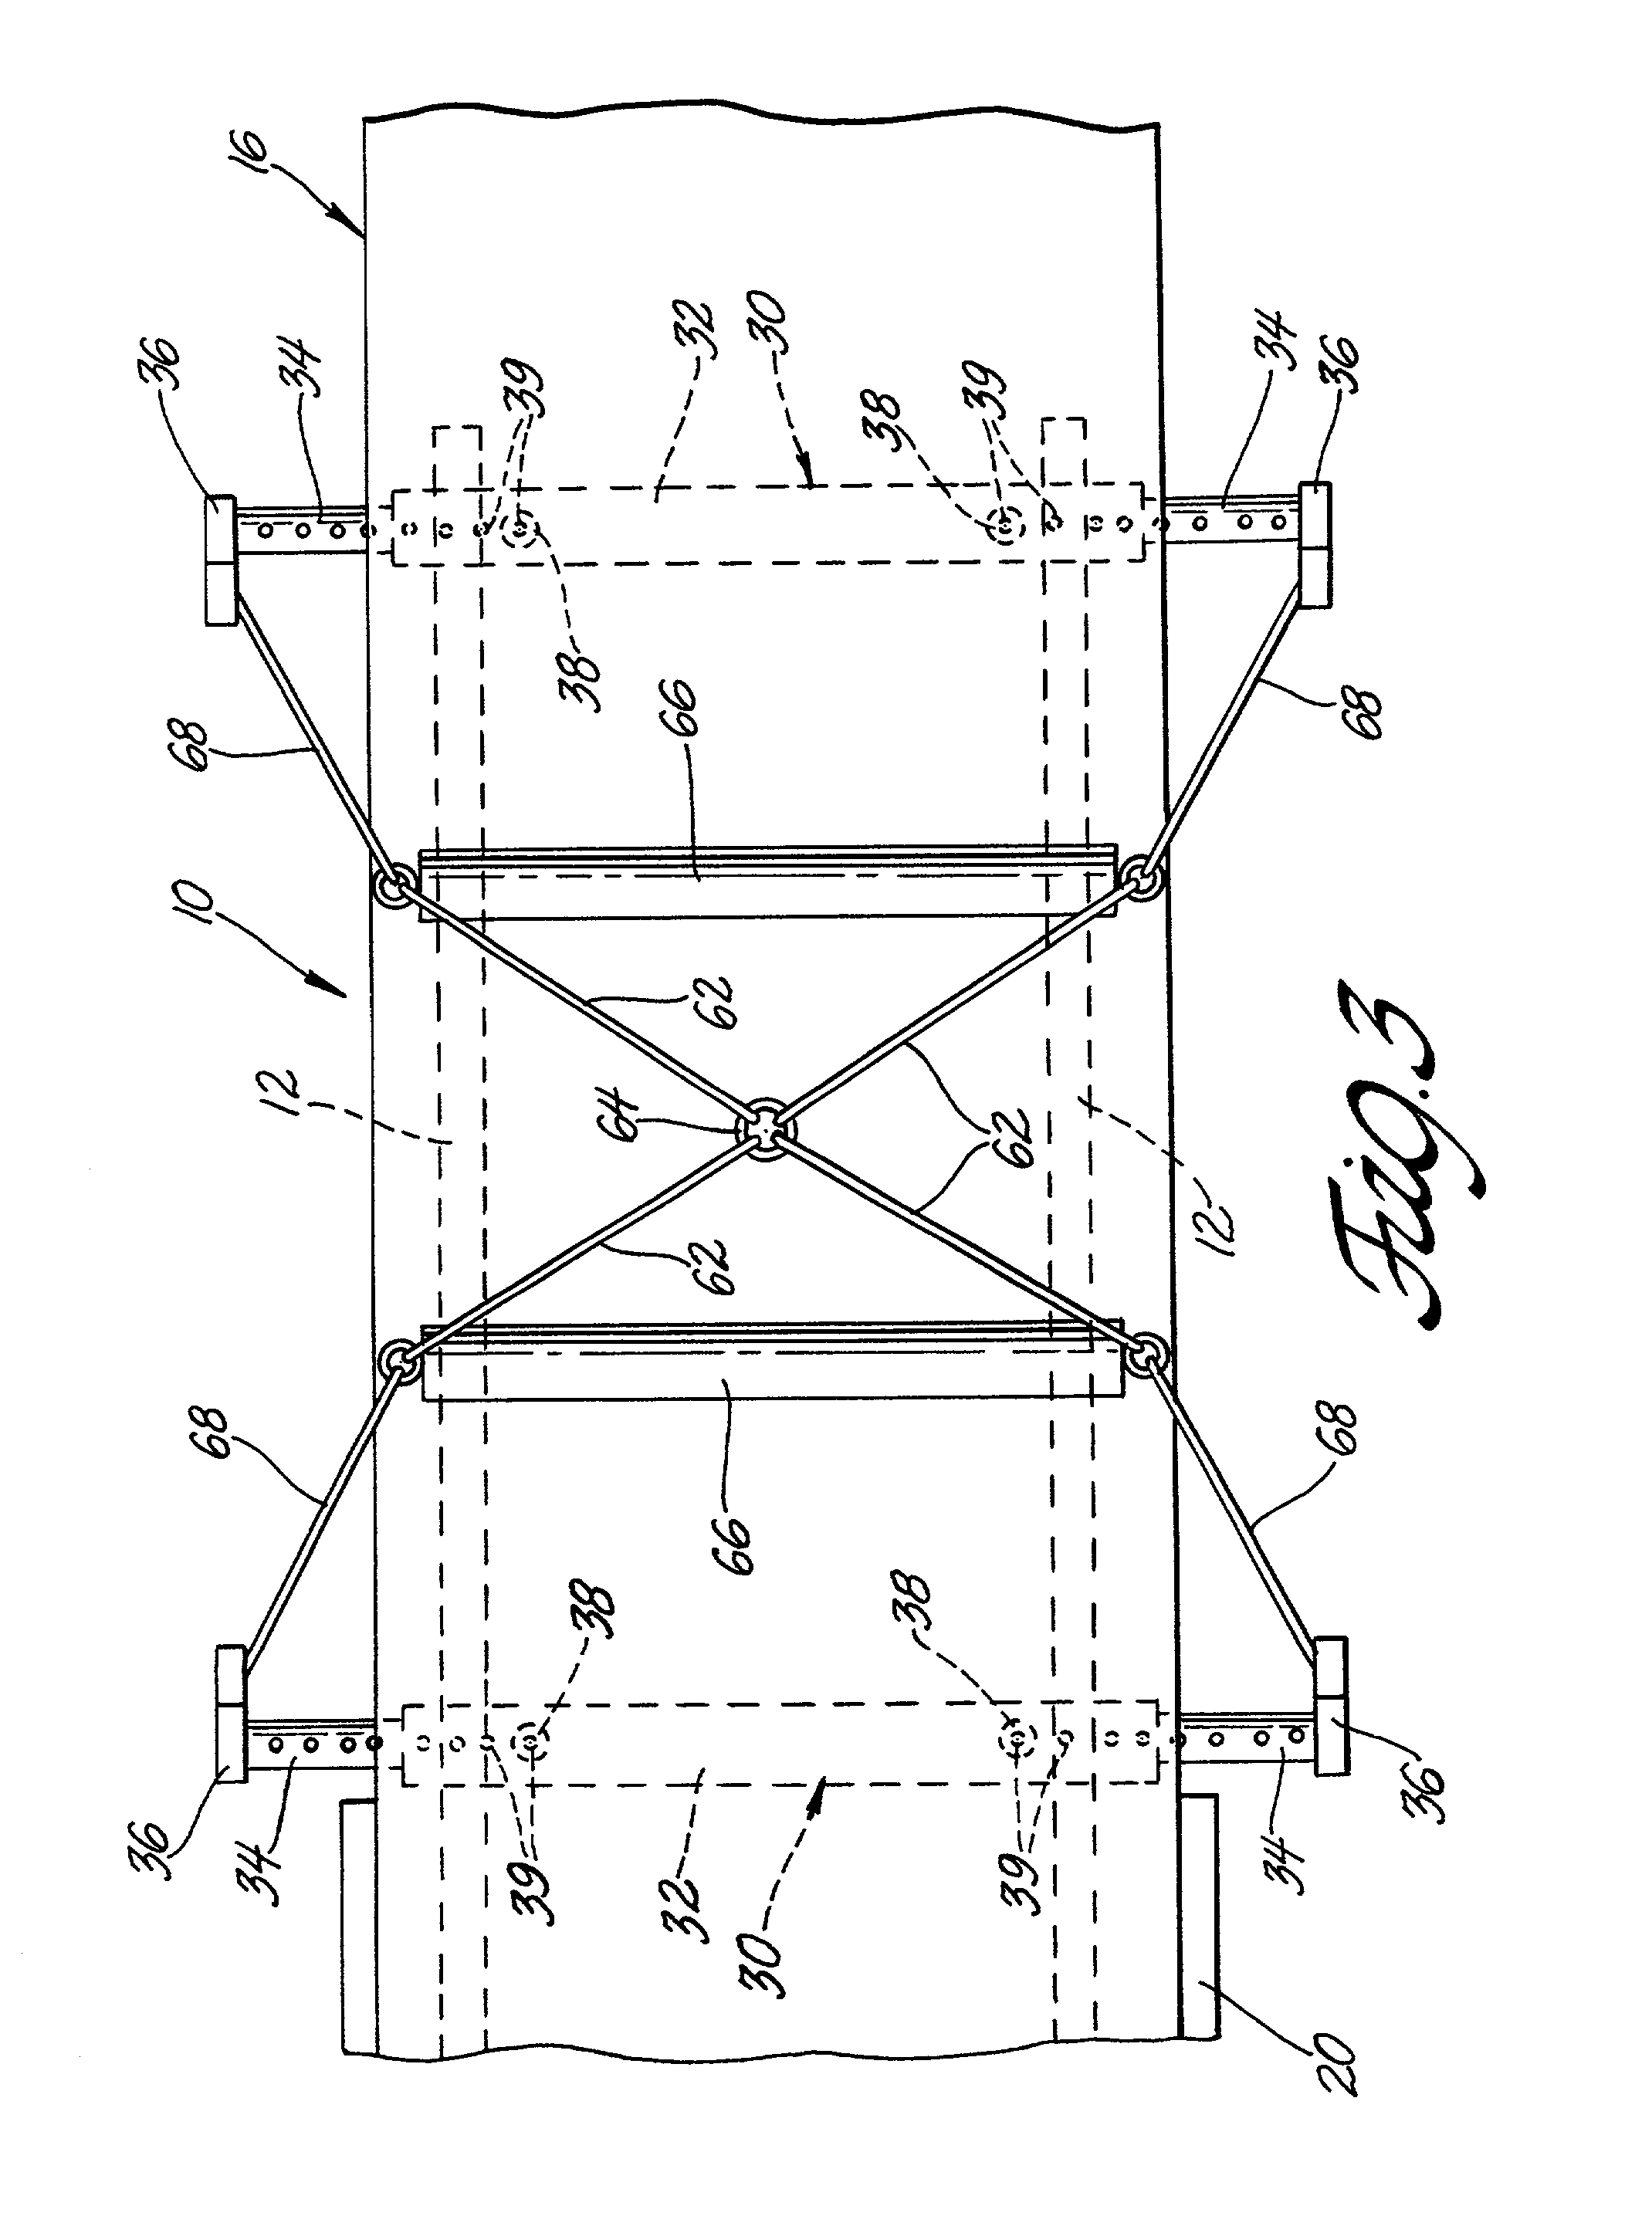 Outrigger lifting device for fuel tankers